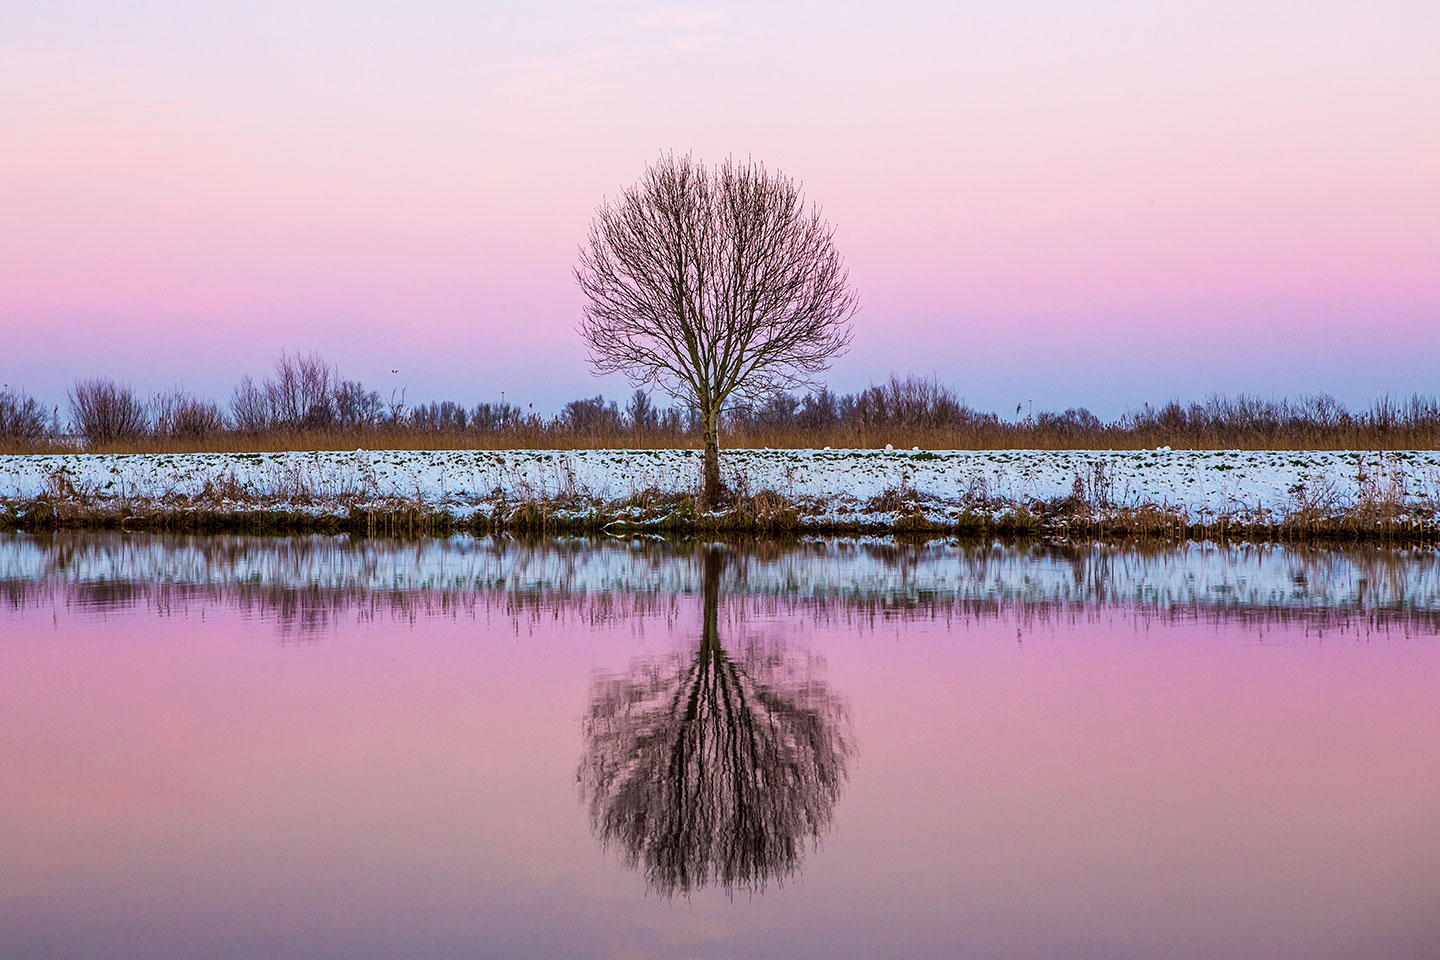 Dutch winter scenery during a travel photography trip through the Netherlands